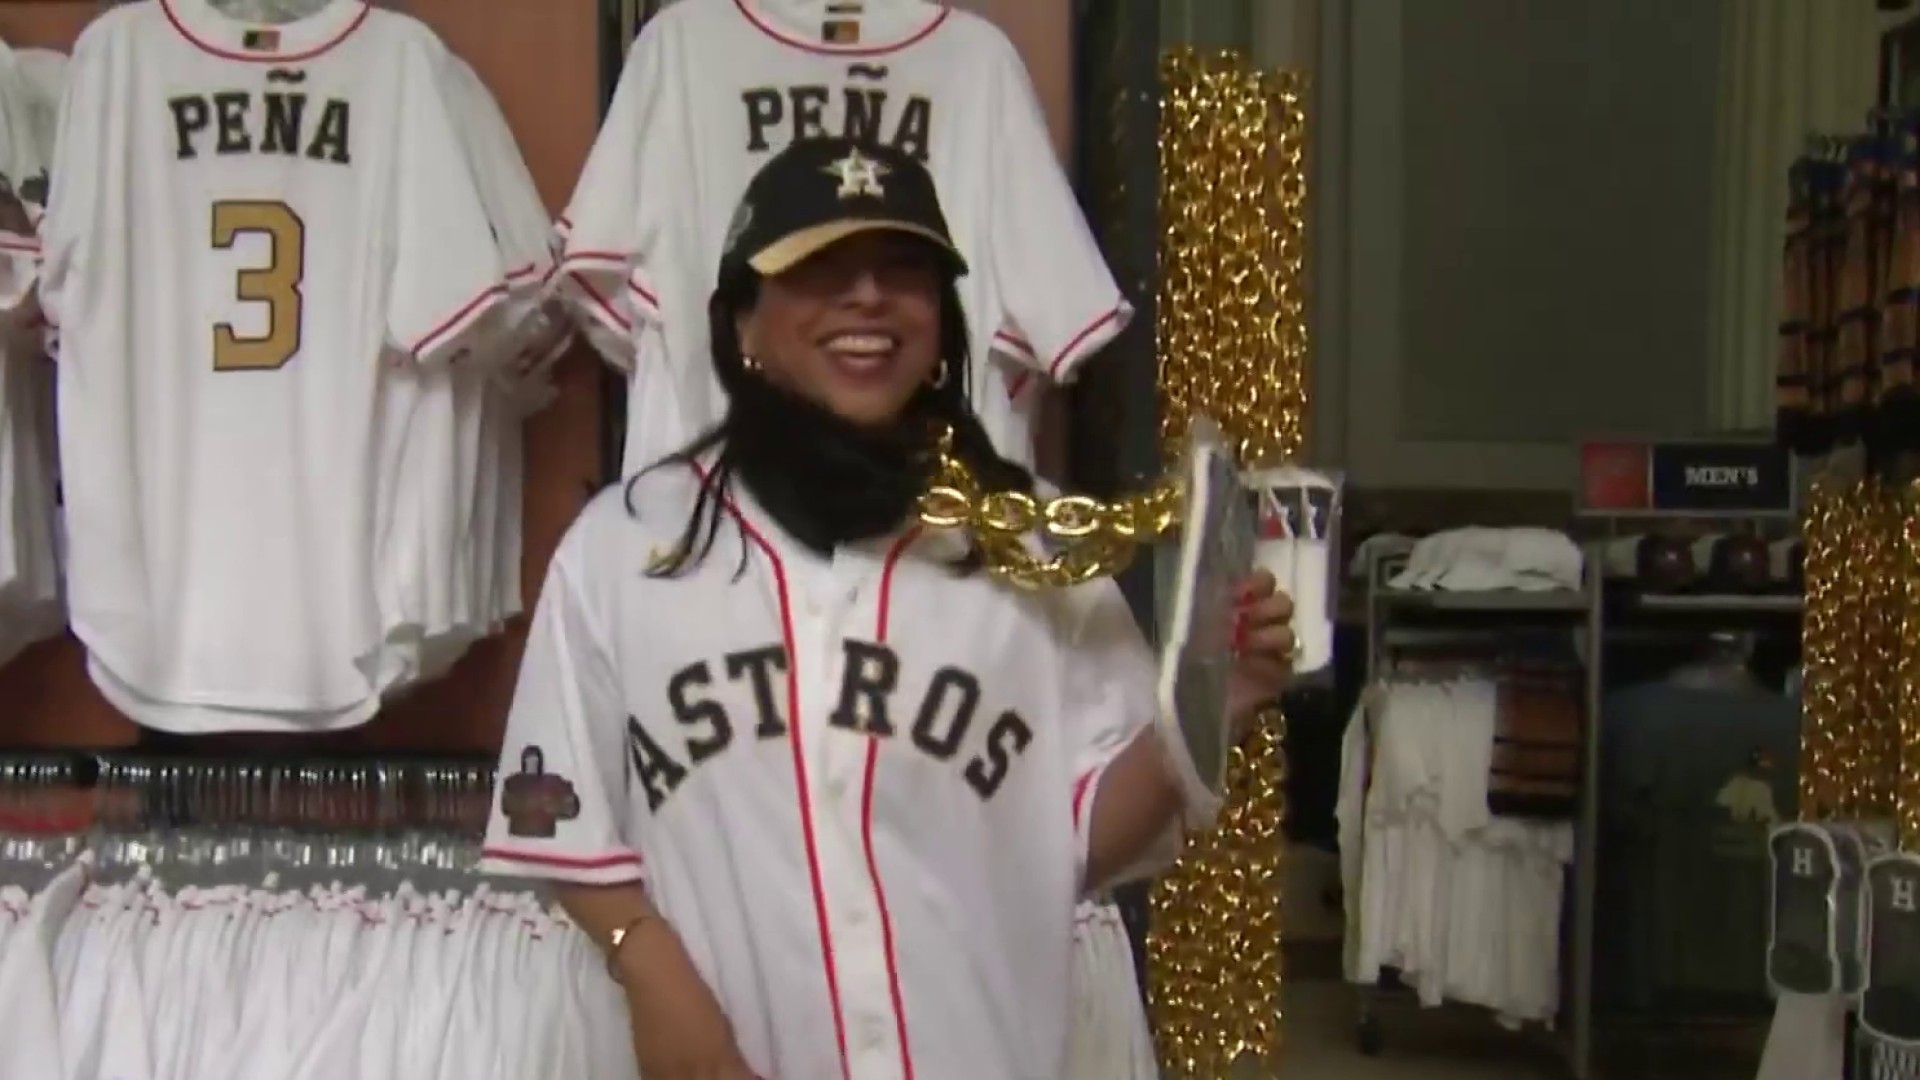 astros gold rush jersey 2023